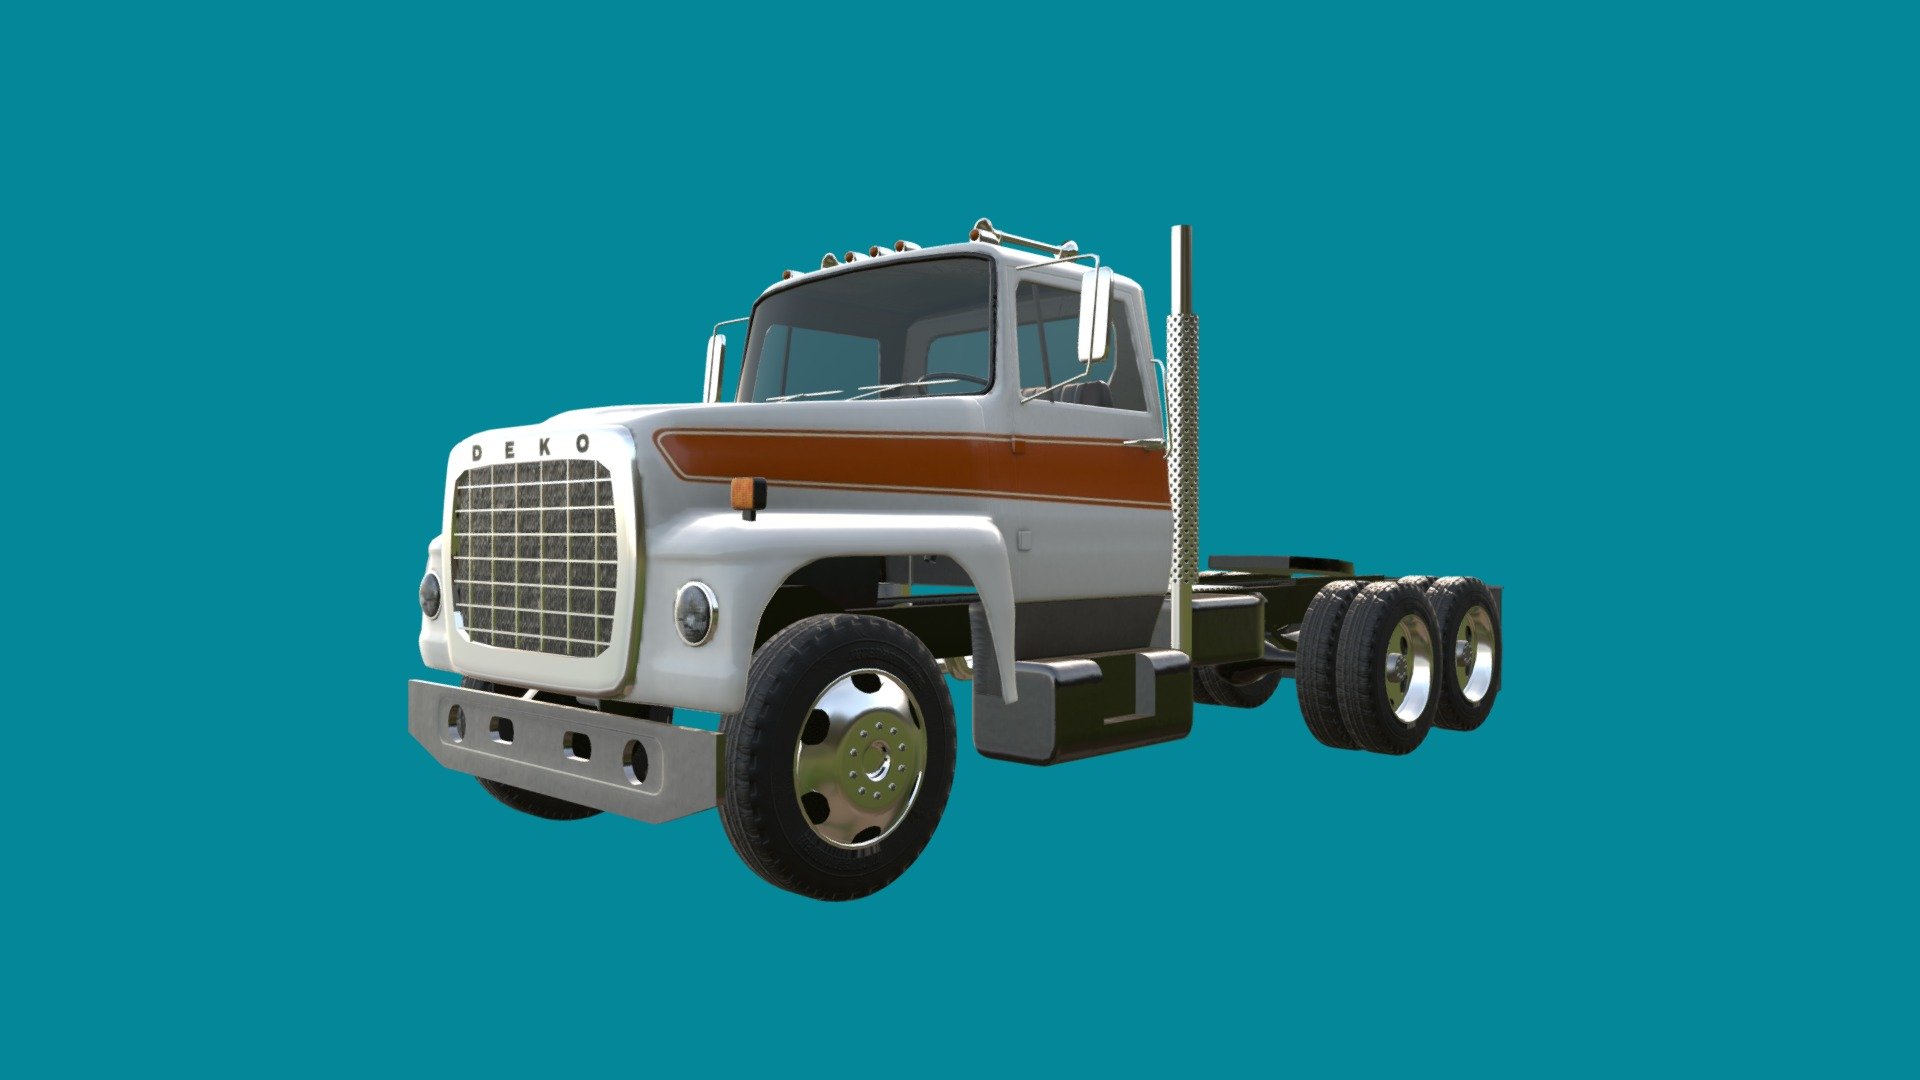 Conventional cab tractor, based on 1981 Ford Louisville L-8000 long nose 3d model